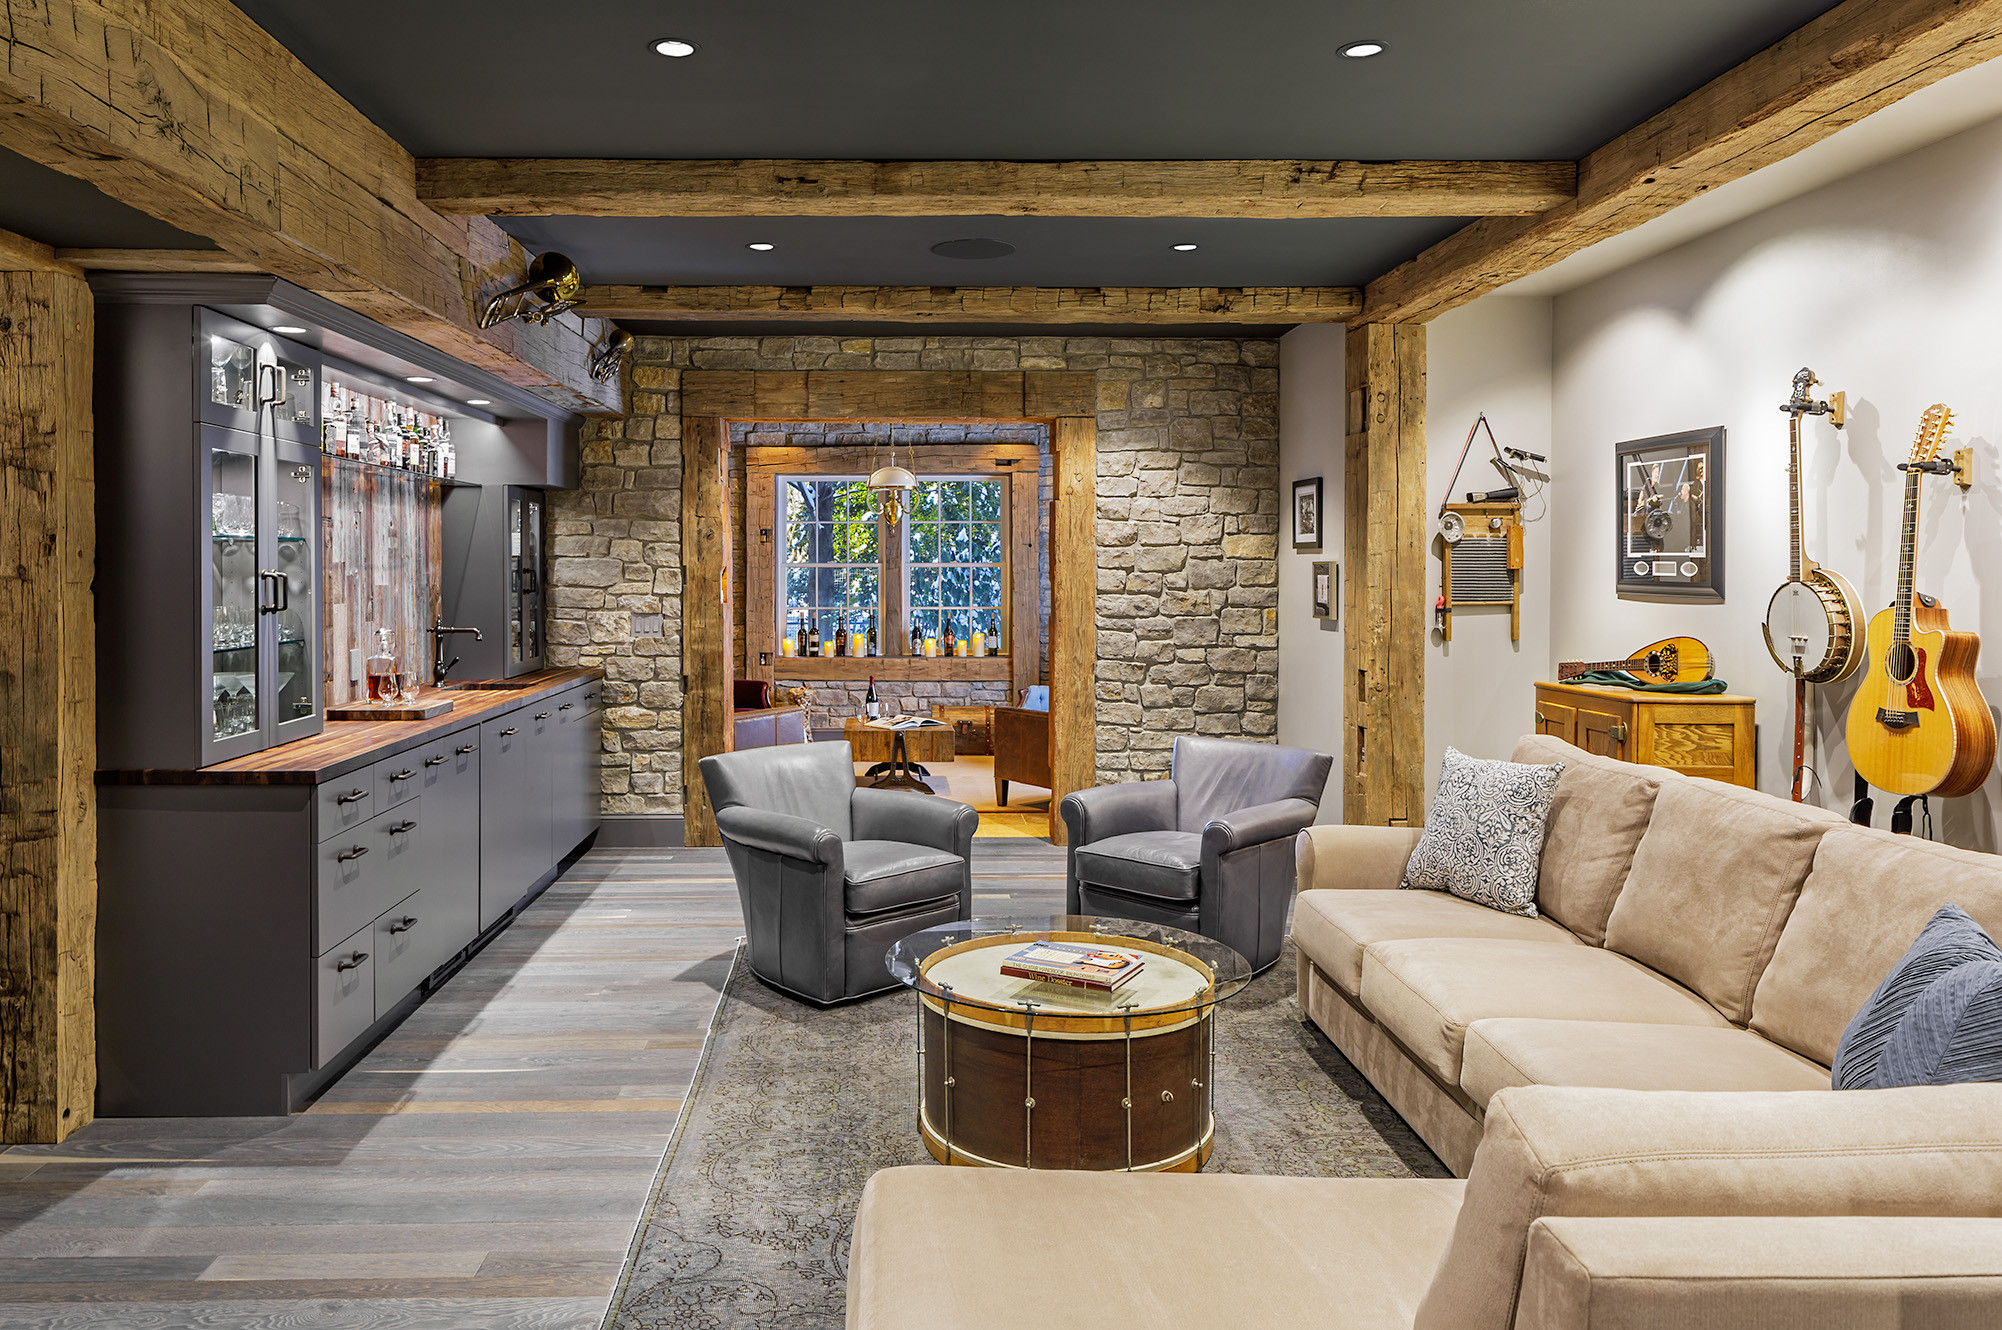 Walk Out Basement Design - Walk Out Ideas Basementremodeling Com : A walk out basement is an architectural feature of a house or town home that basically makes the basement space directly accessible from the outside.